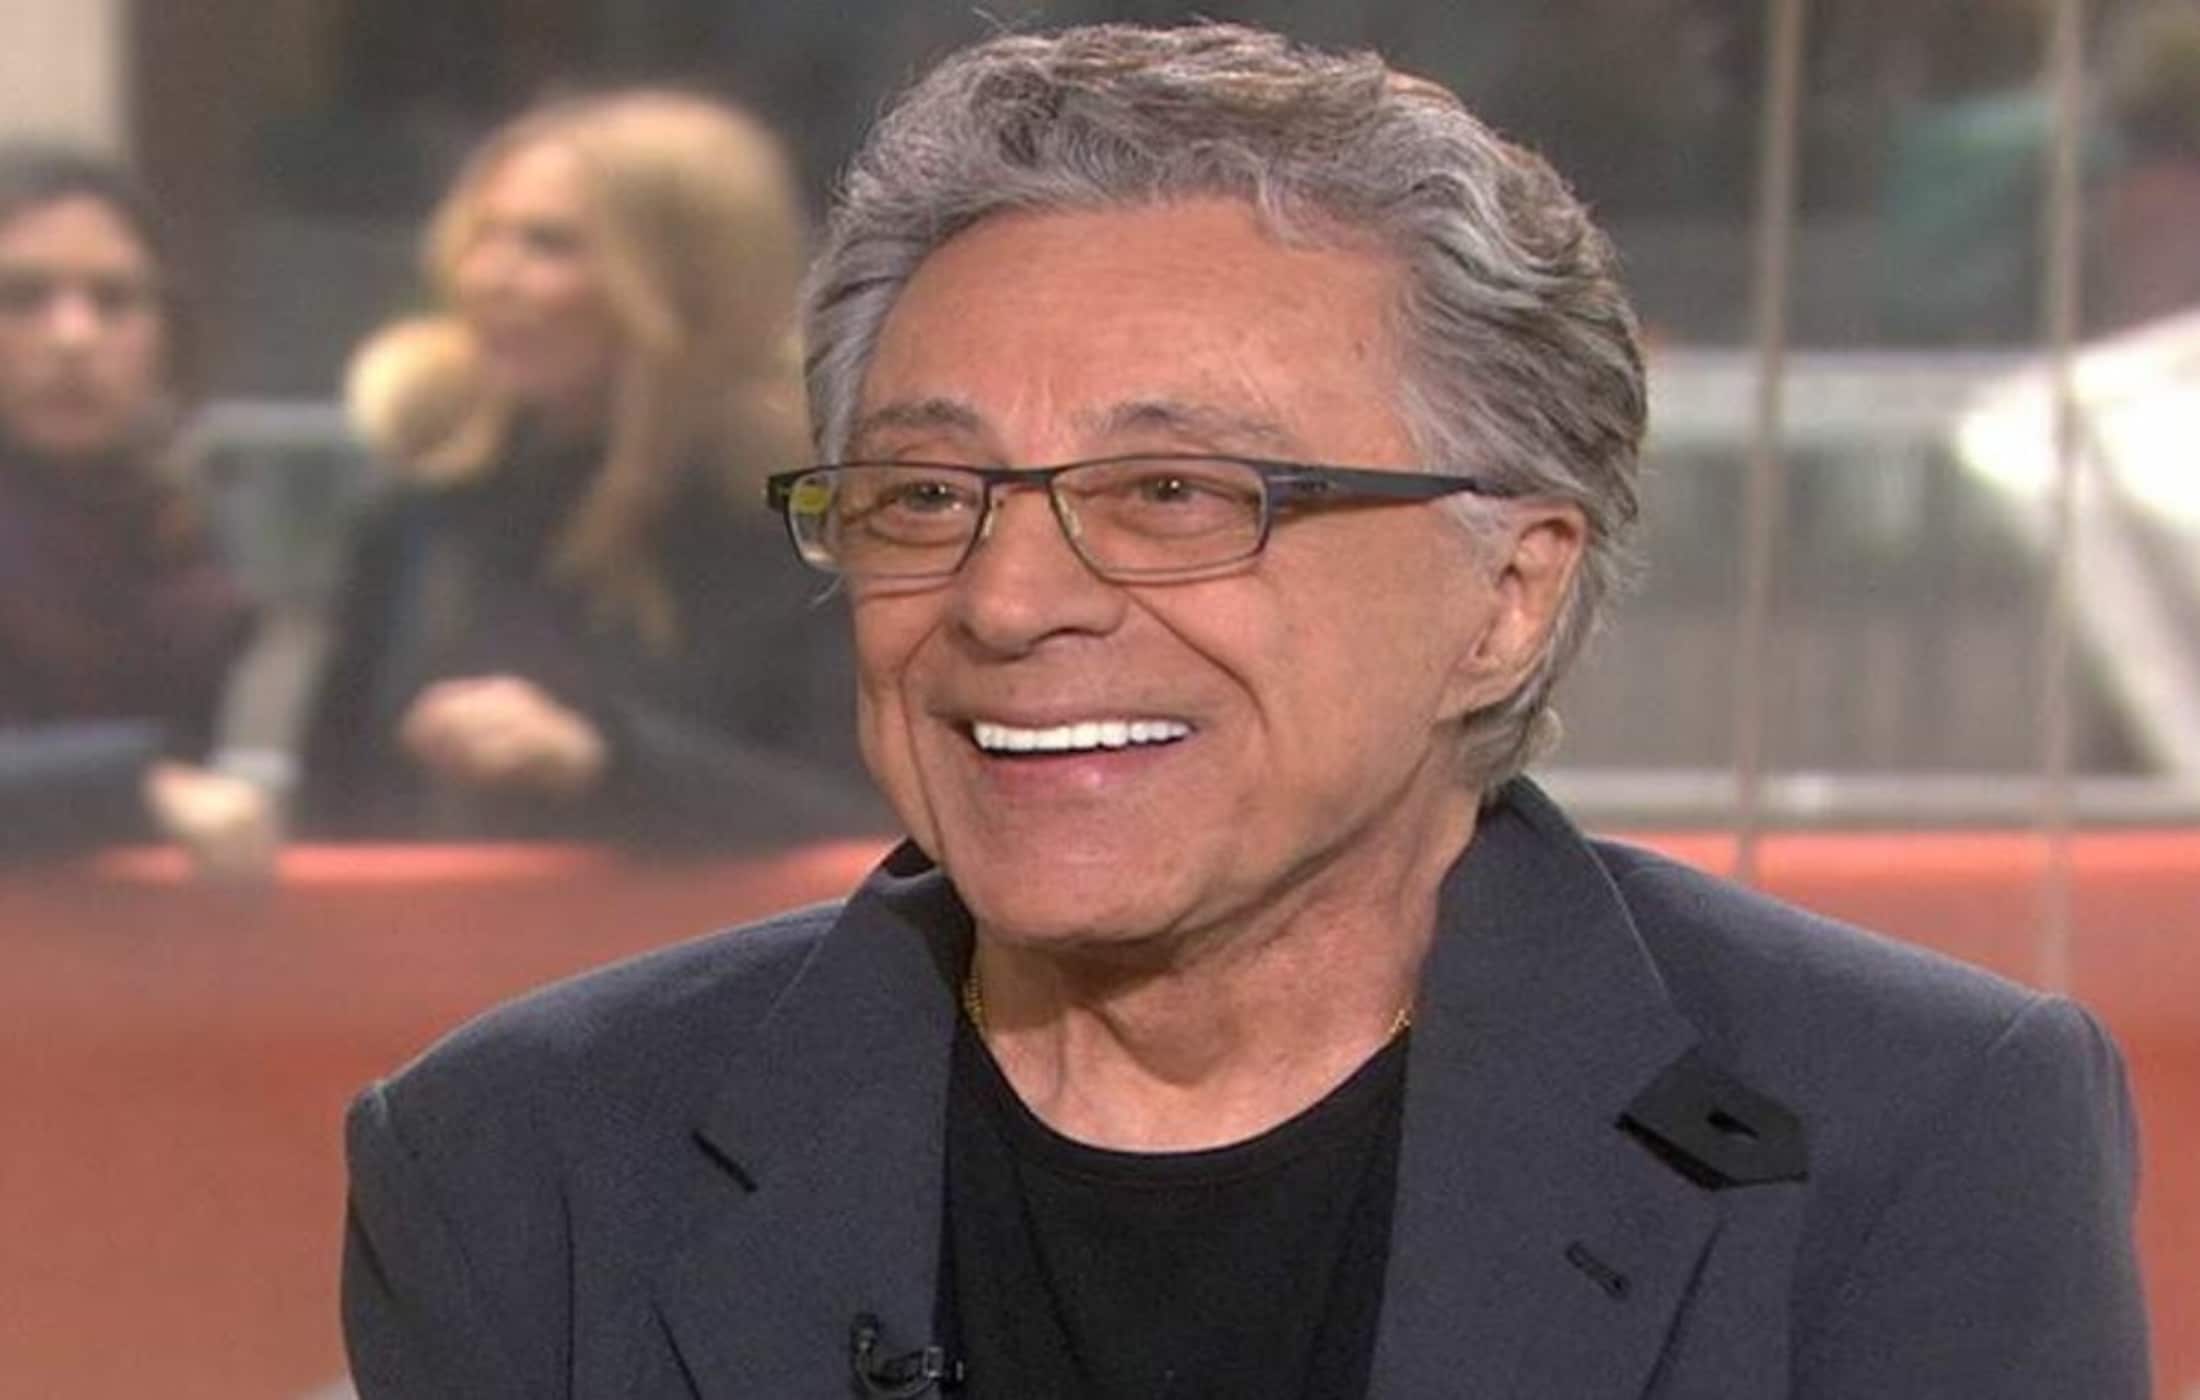 Frankie Valli age, net worth, wiki, family, biography and latest